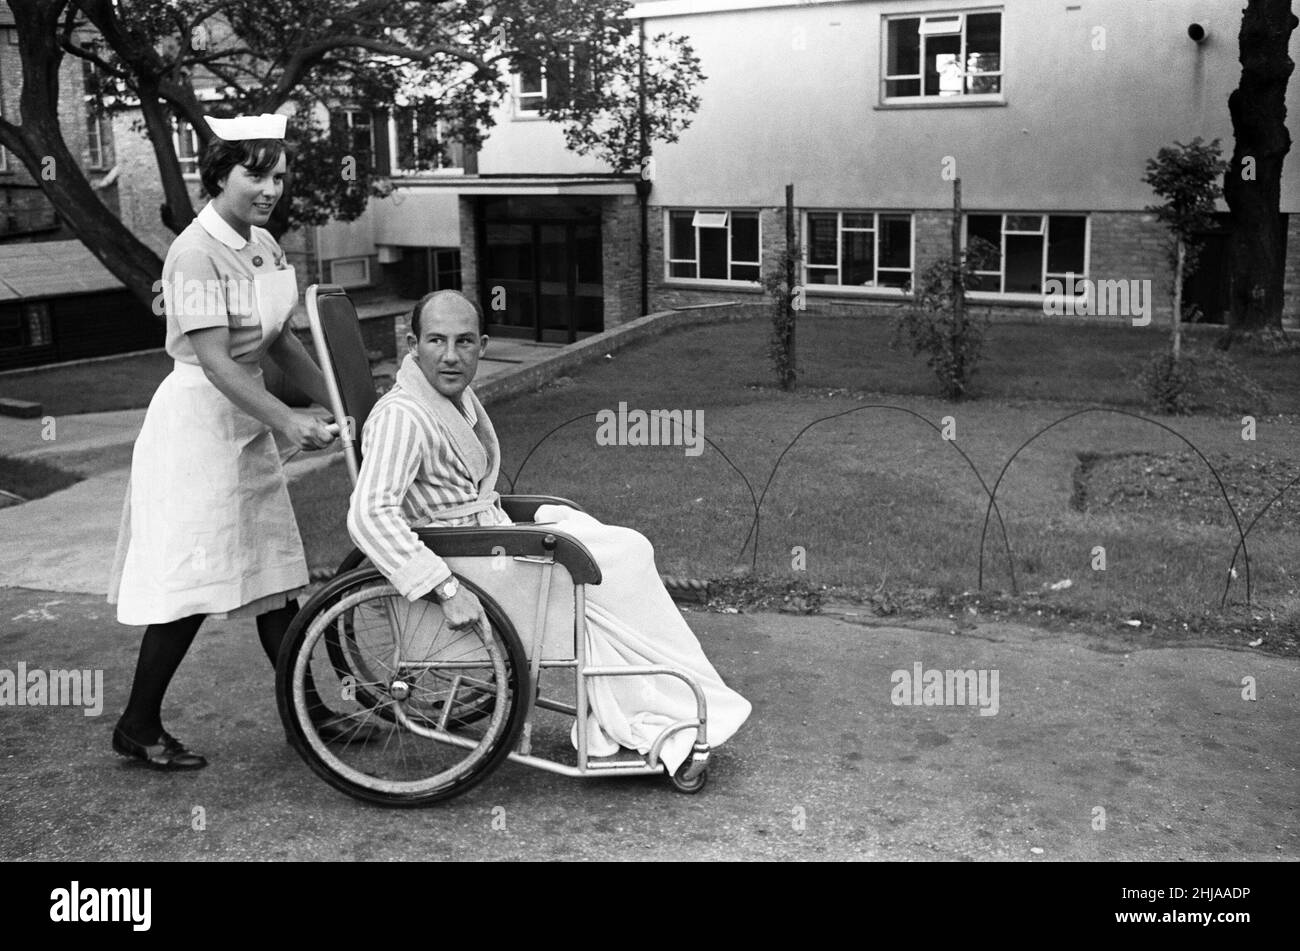 Stirling Moss, pictured in a wheelchair being pushed by a nurse, in the grounds of the Atkinson Morleys Hospital at Wimbledon. Stirling, 32, received head, arm and leg injuries in a 120 m.p.h. crash at Goodwood seven weeks ago. 11th June 1962. Stock Photo